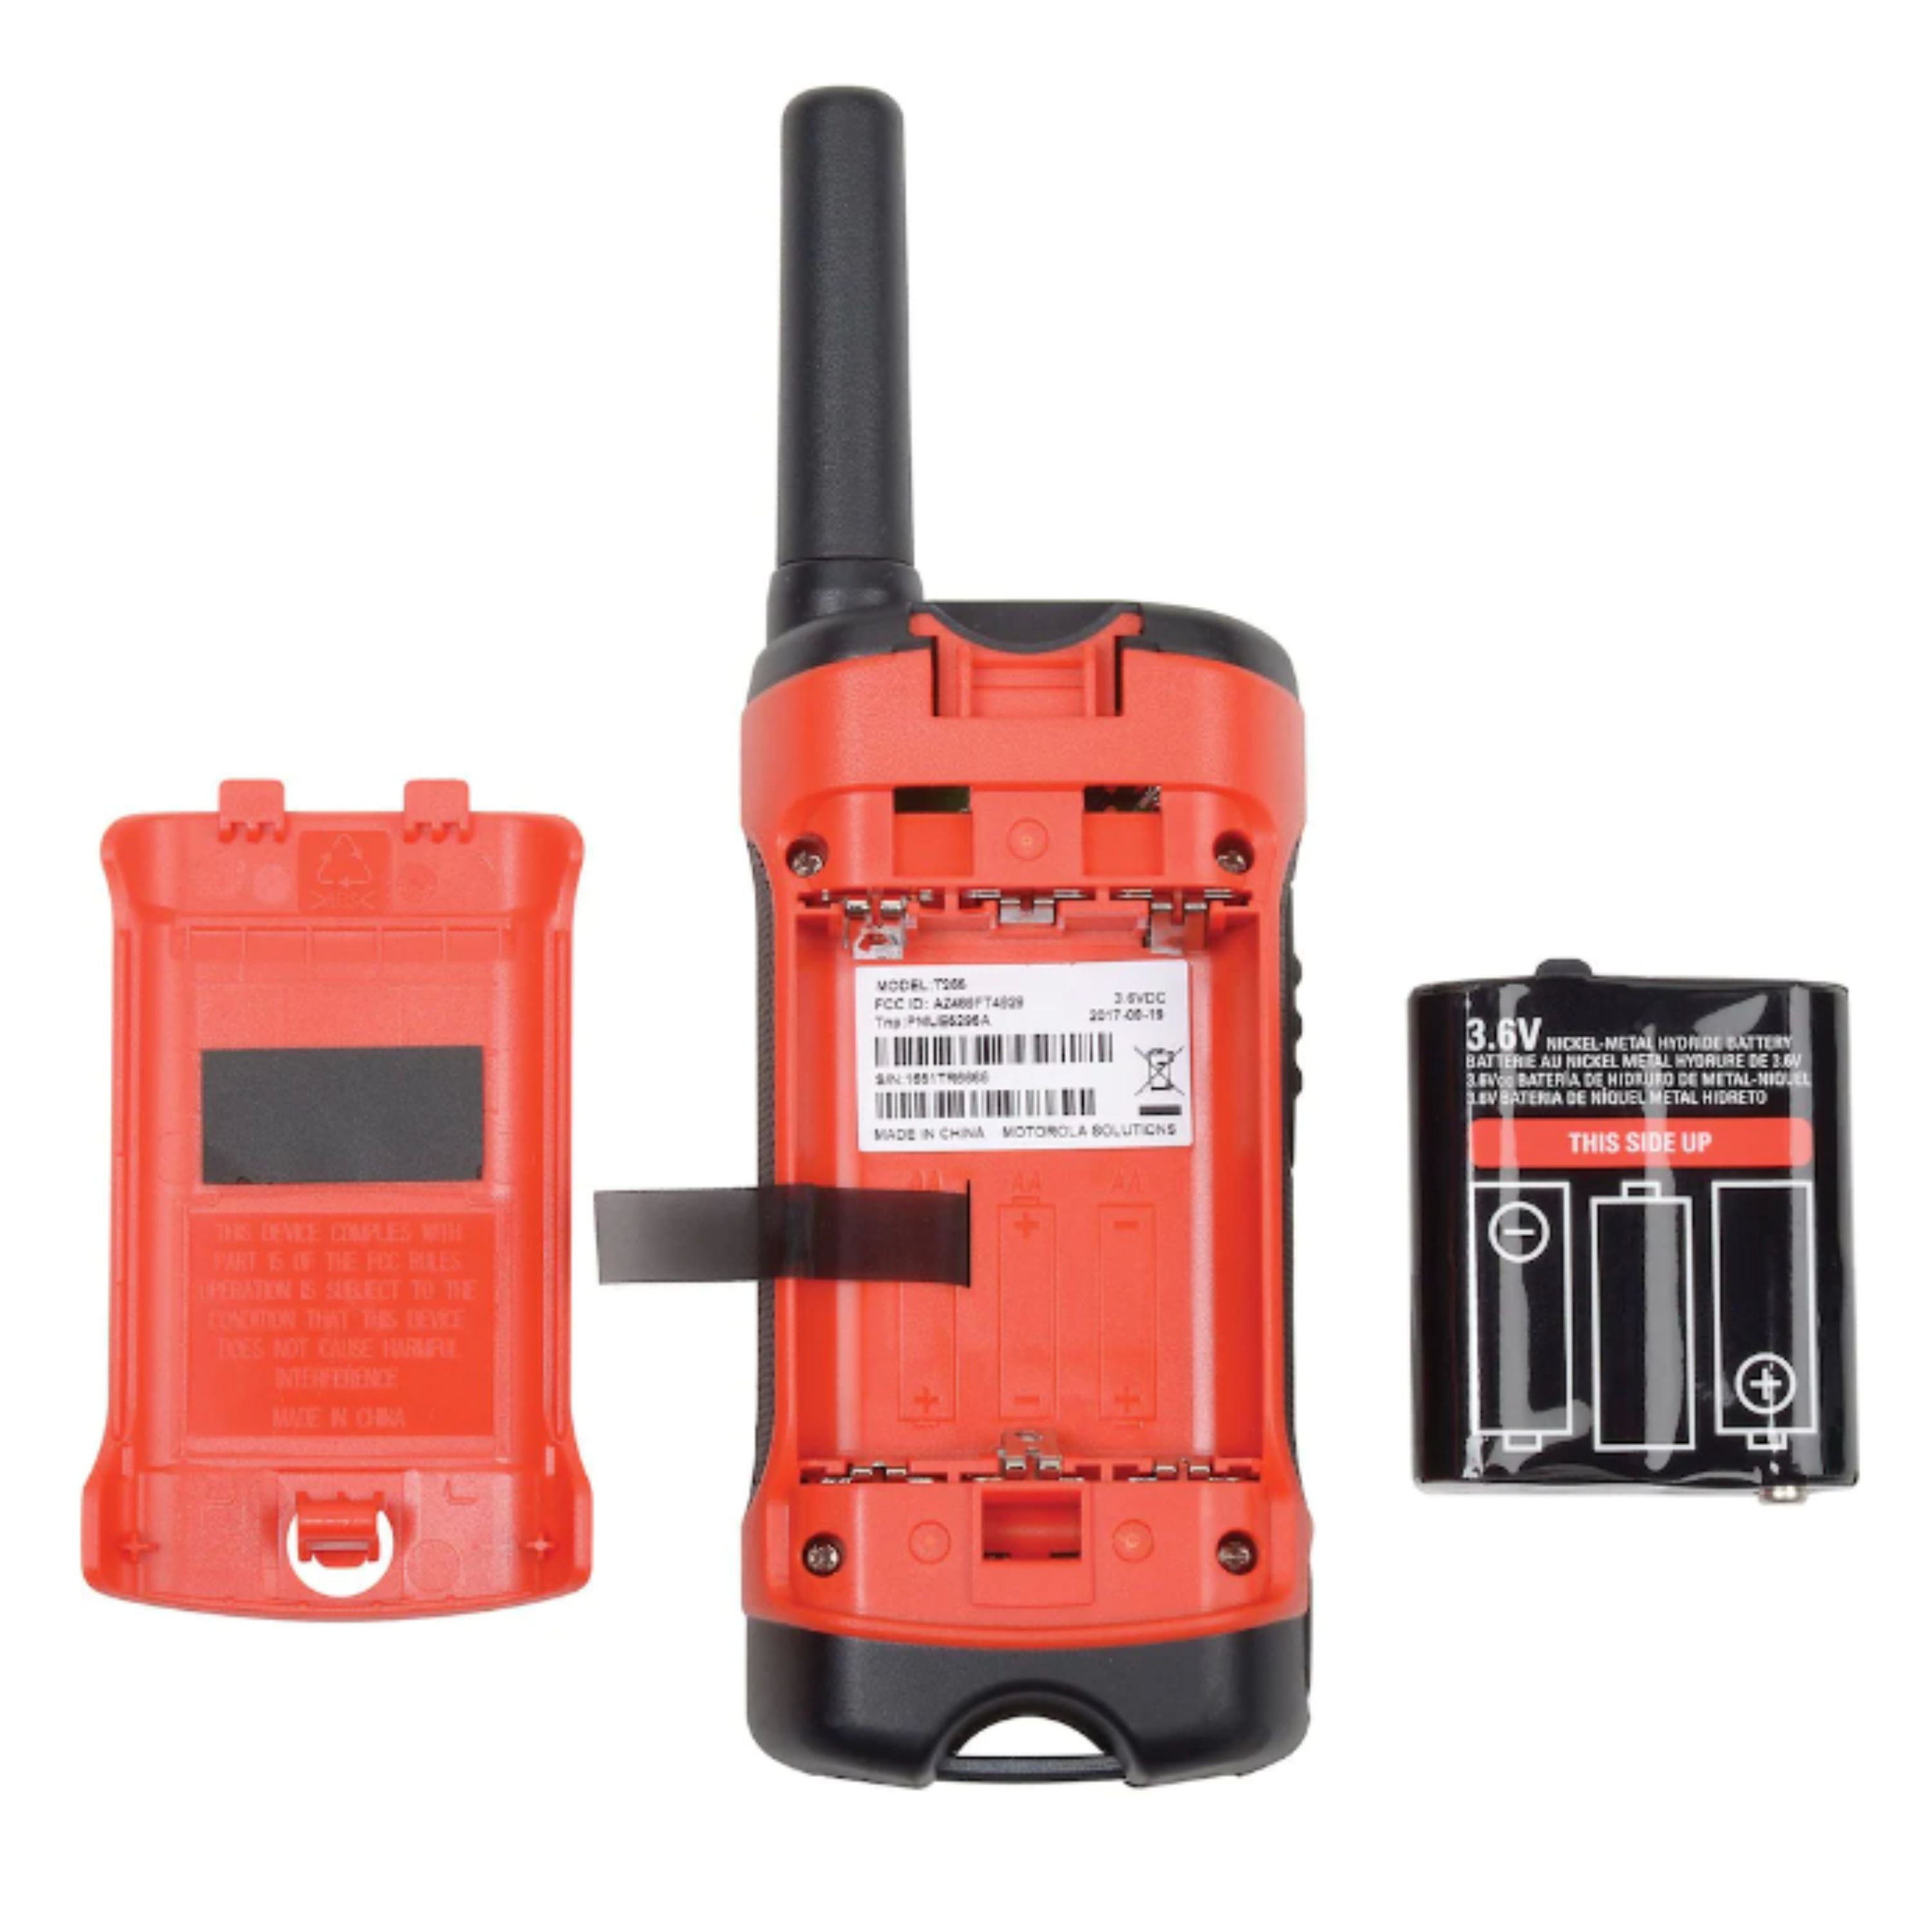 Radios bidirectionnelles "T265 Talkabout"||"T265 Talkabout" Two-way radios